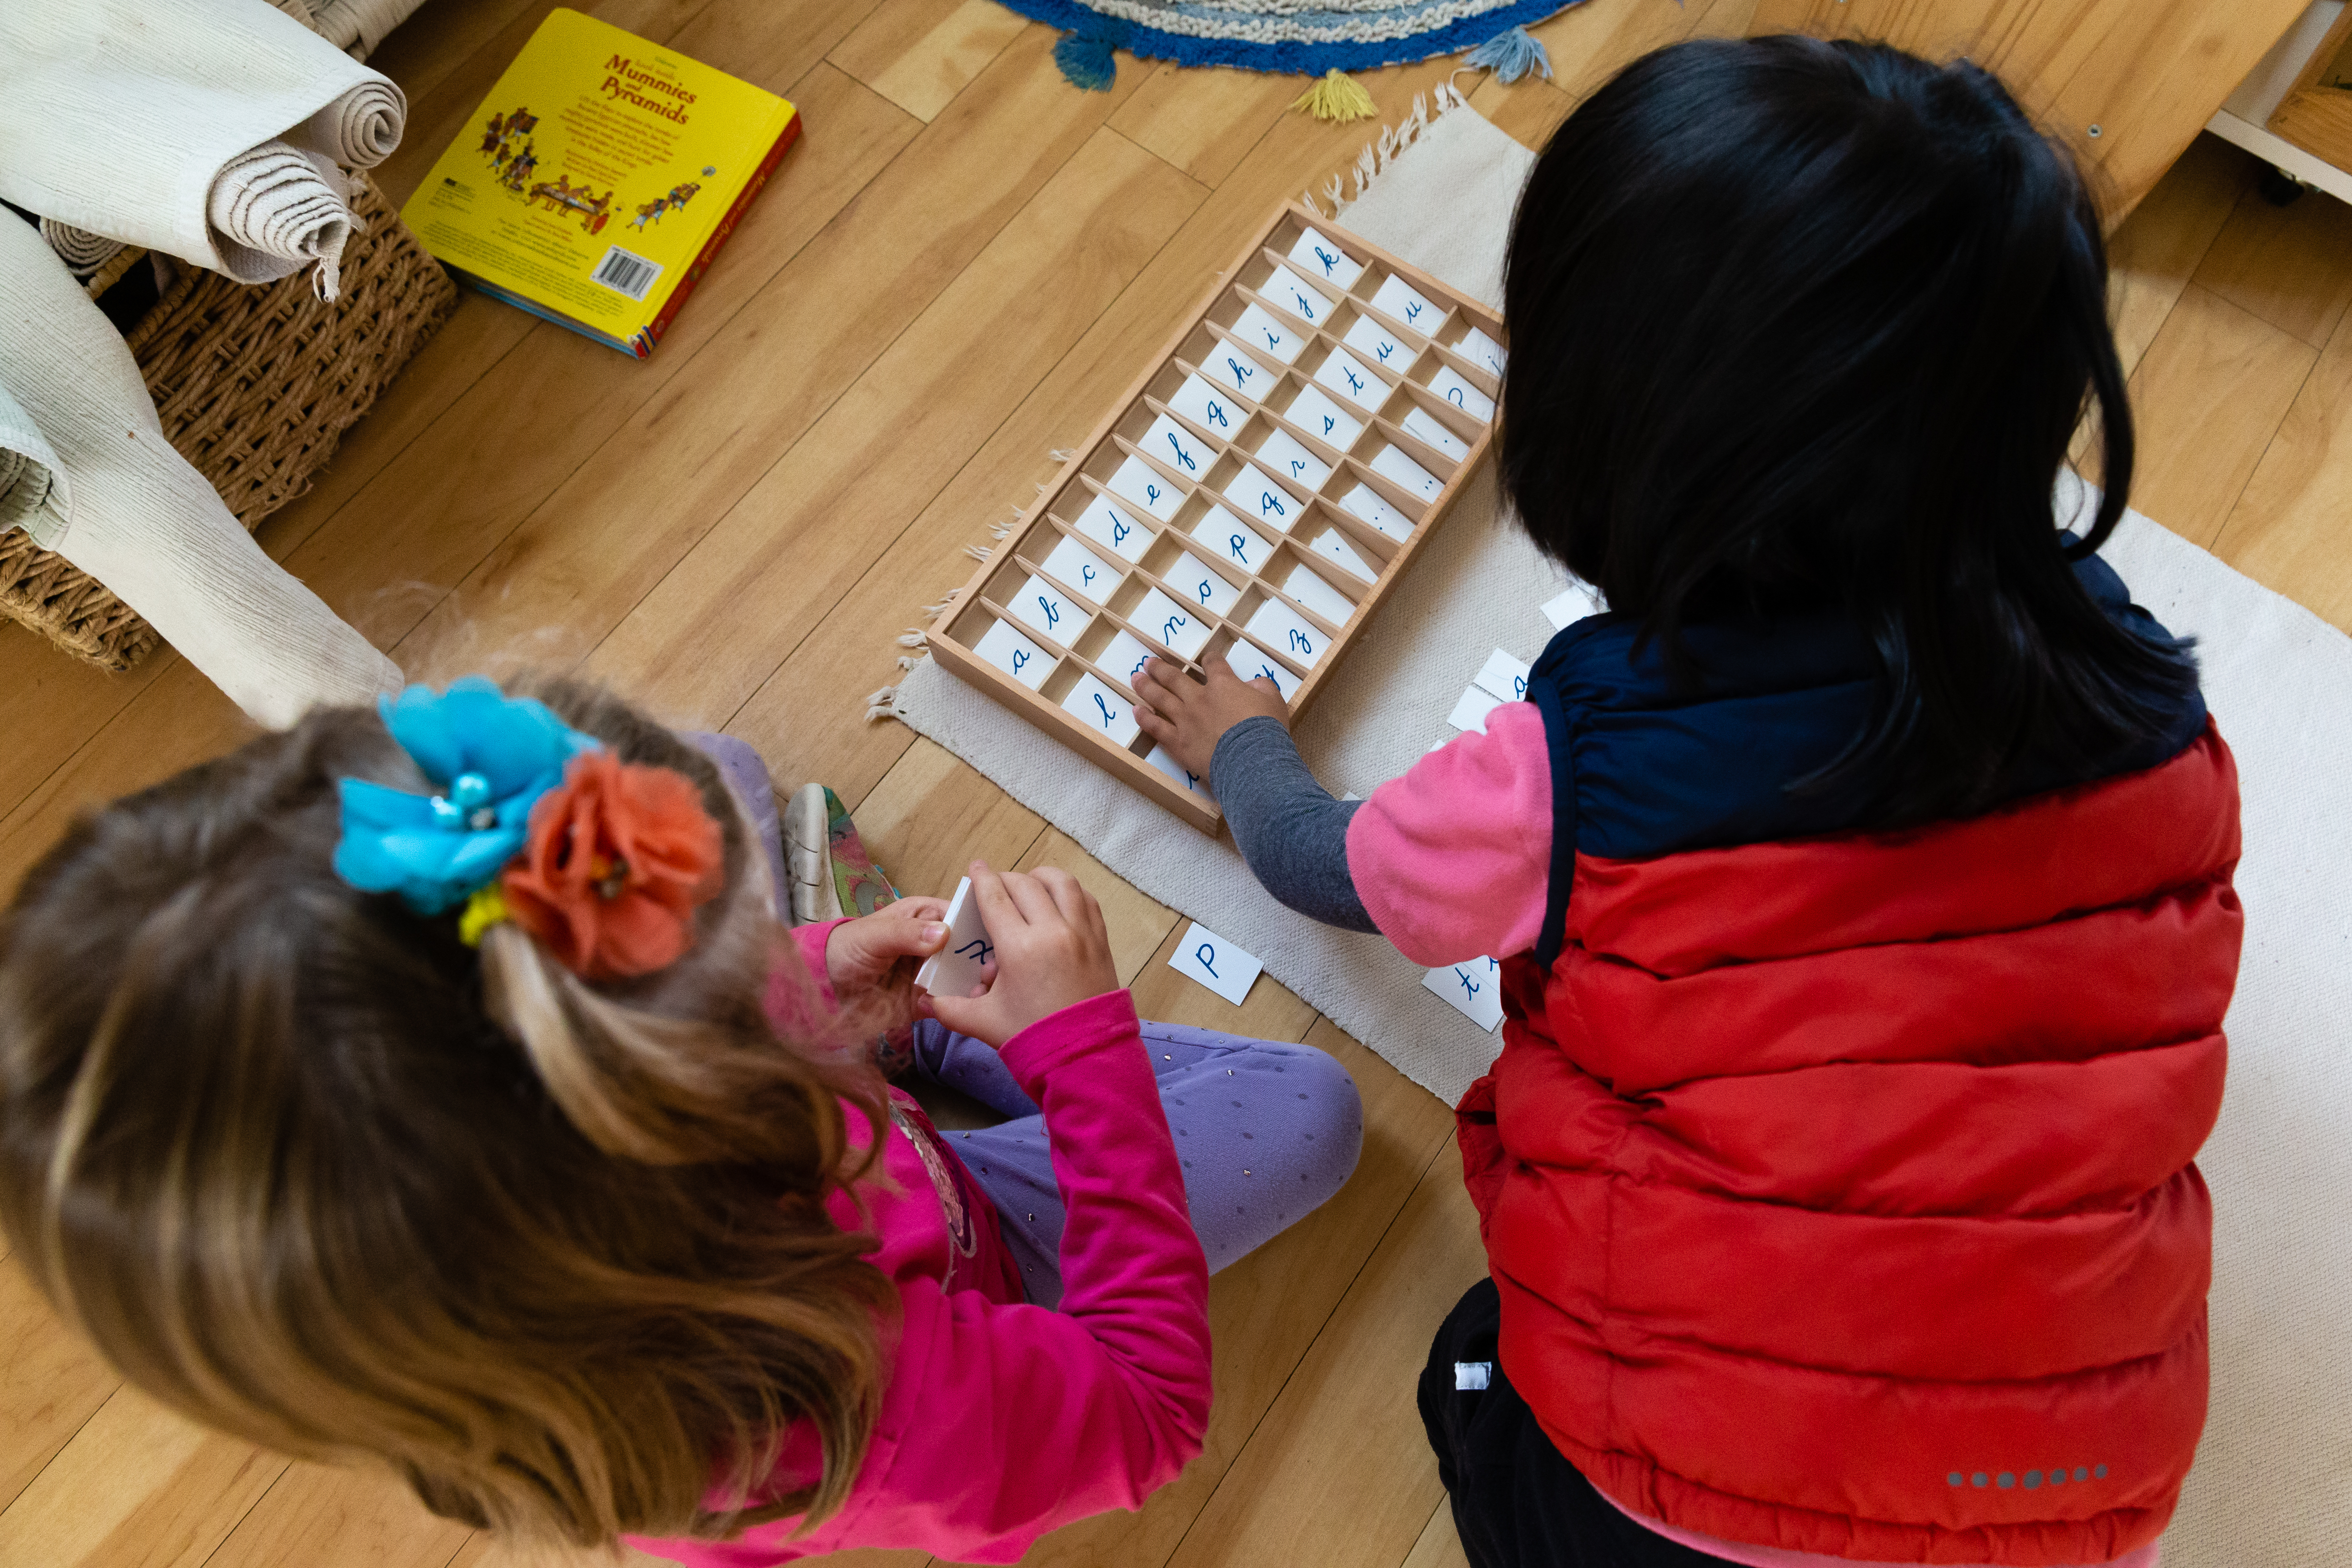 Boy and girl socializing while learning to spell in their Montessori classroom